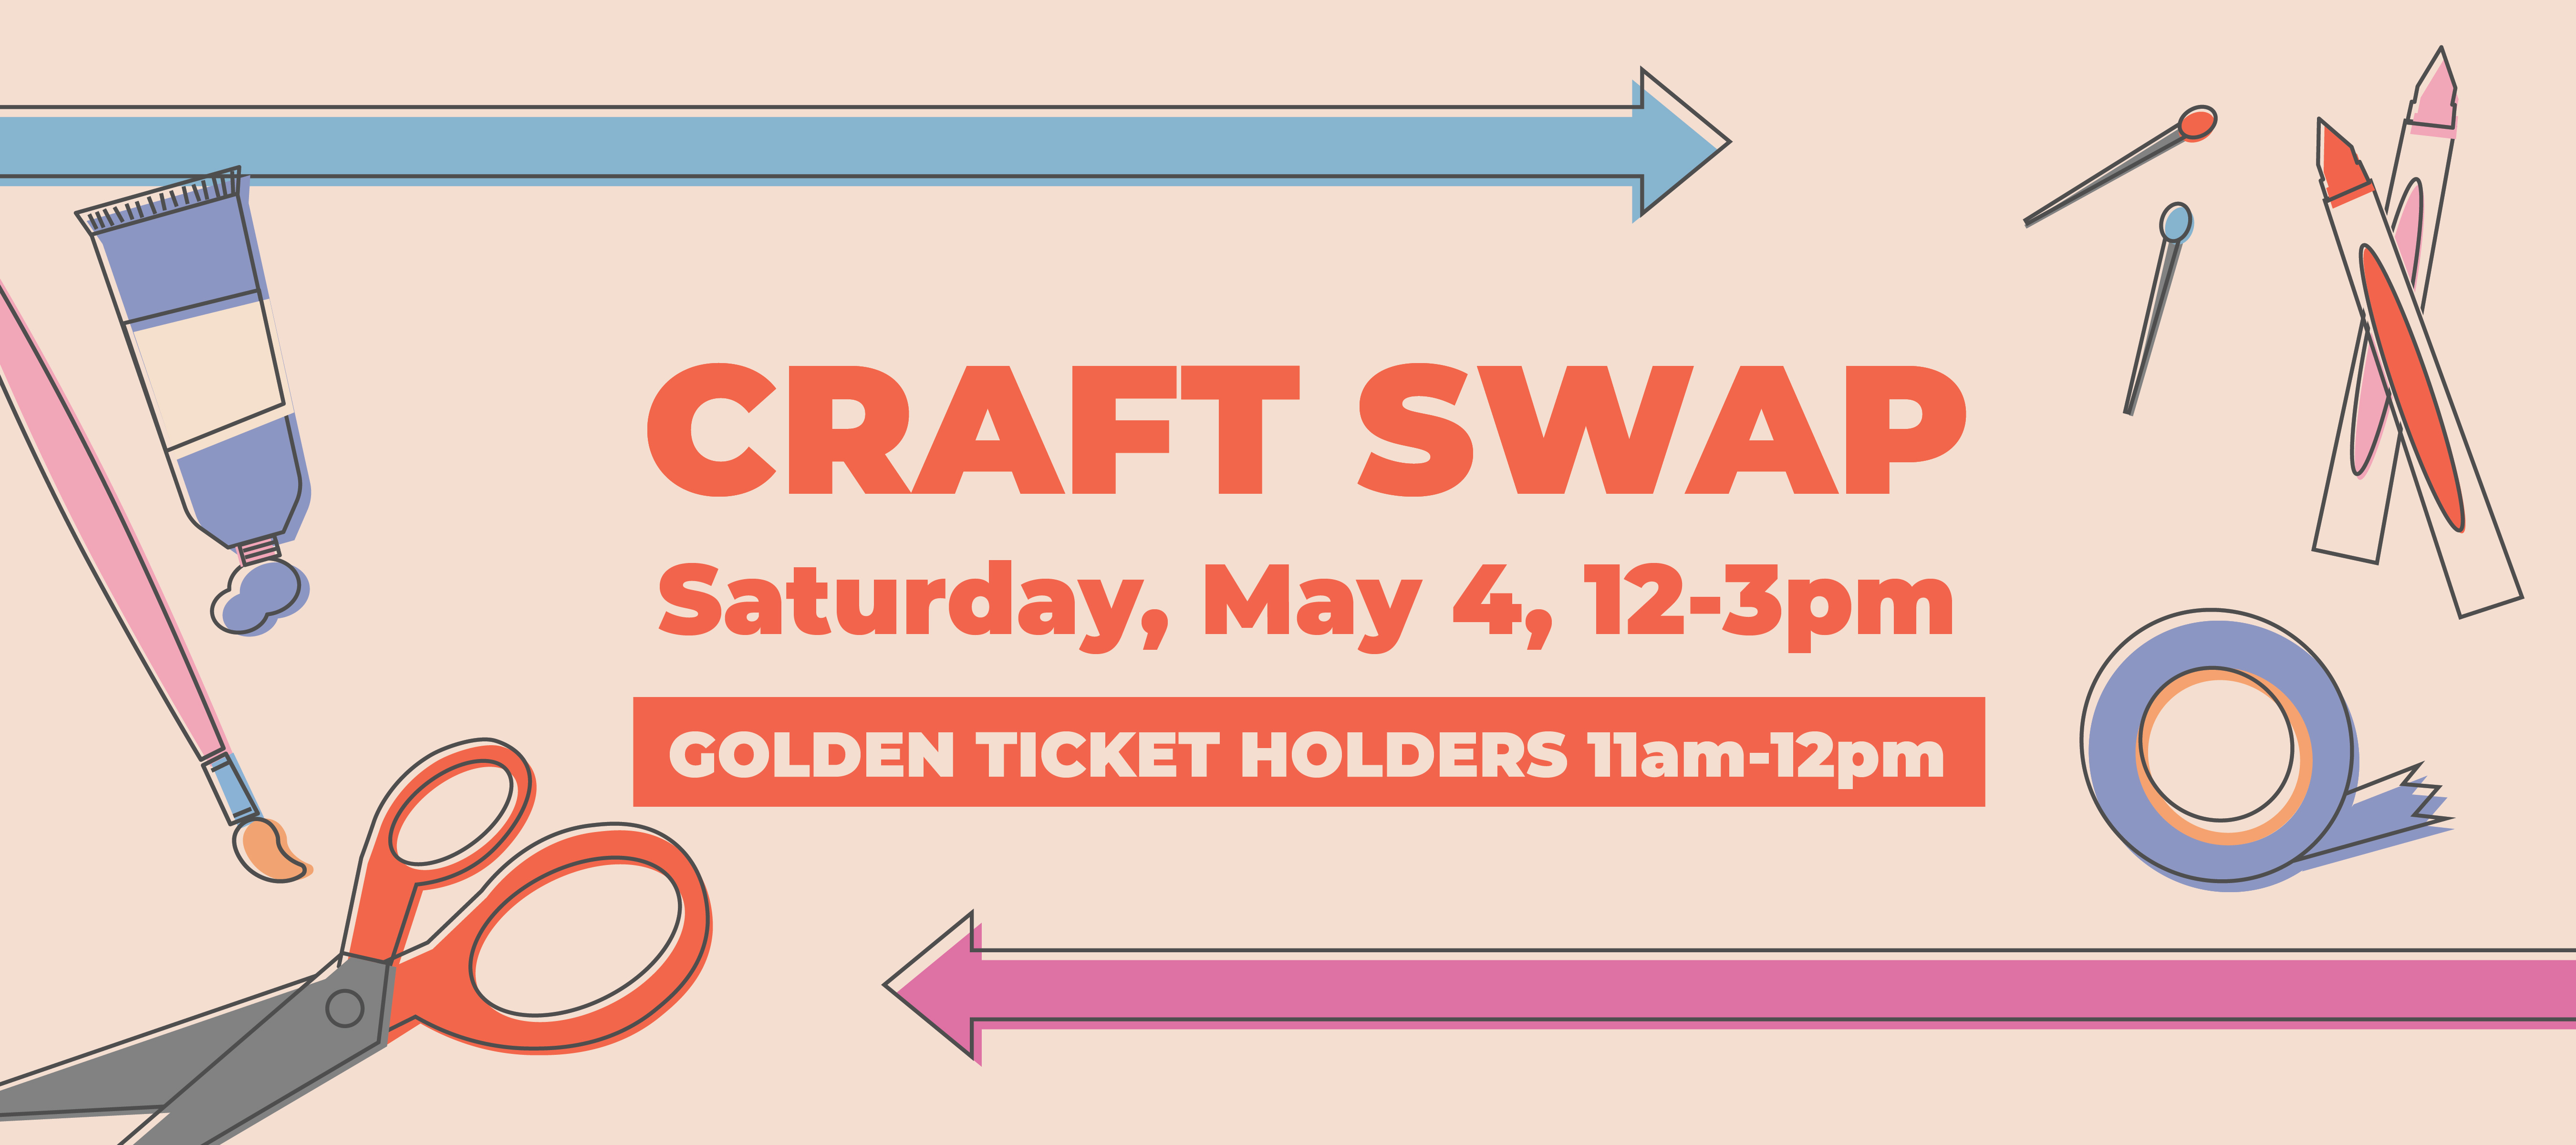 phpl, Prospect Heights Public Library, Craft Supply Swap, new projects, creative projects, fabric, yarn, sewing notions, needlepoint, diamond art, scrapbooking supplies, beads, embellishments, art supplies, Adult